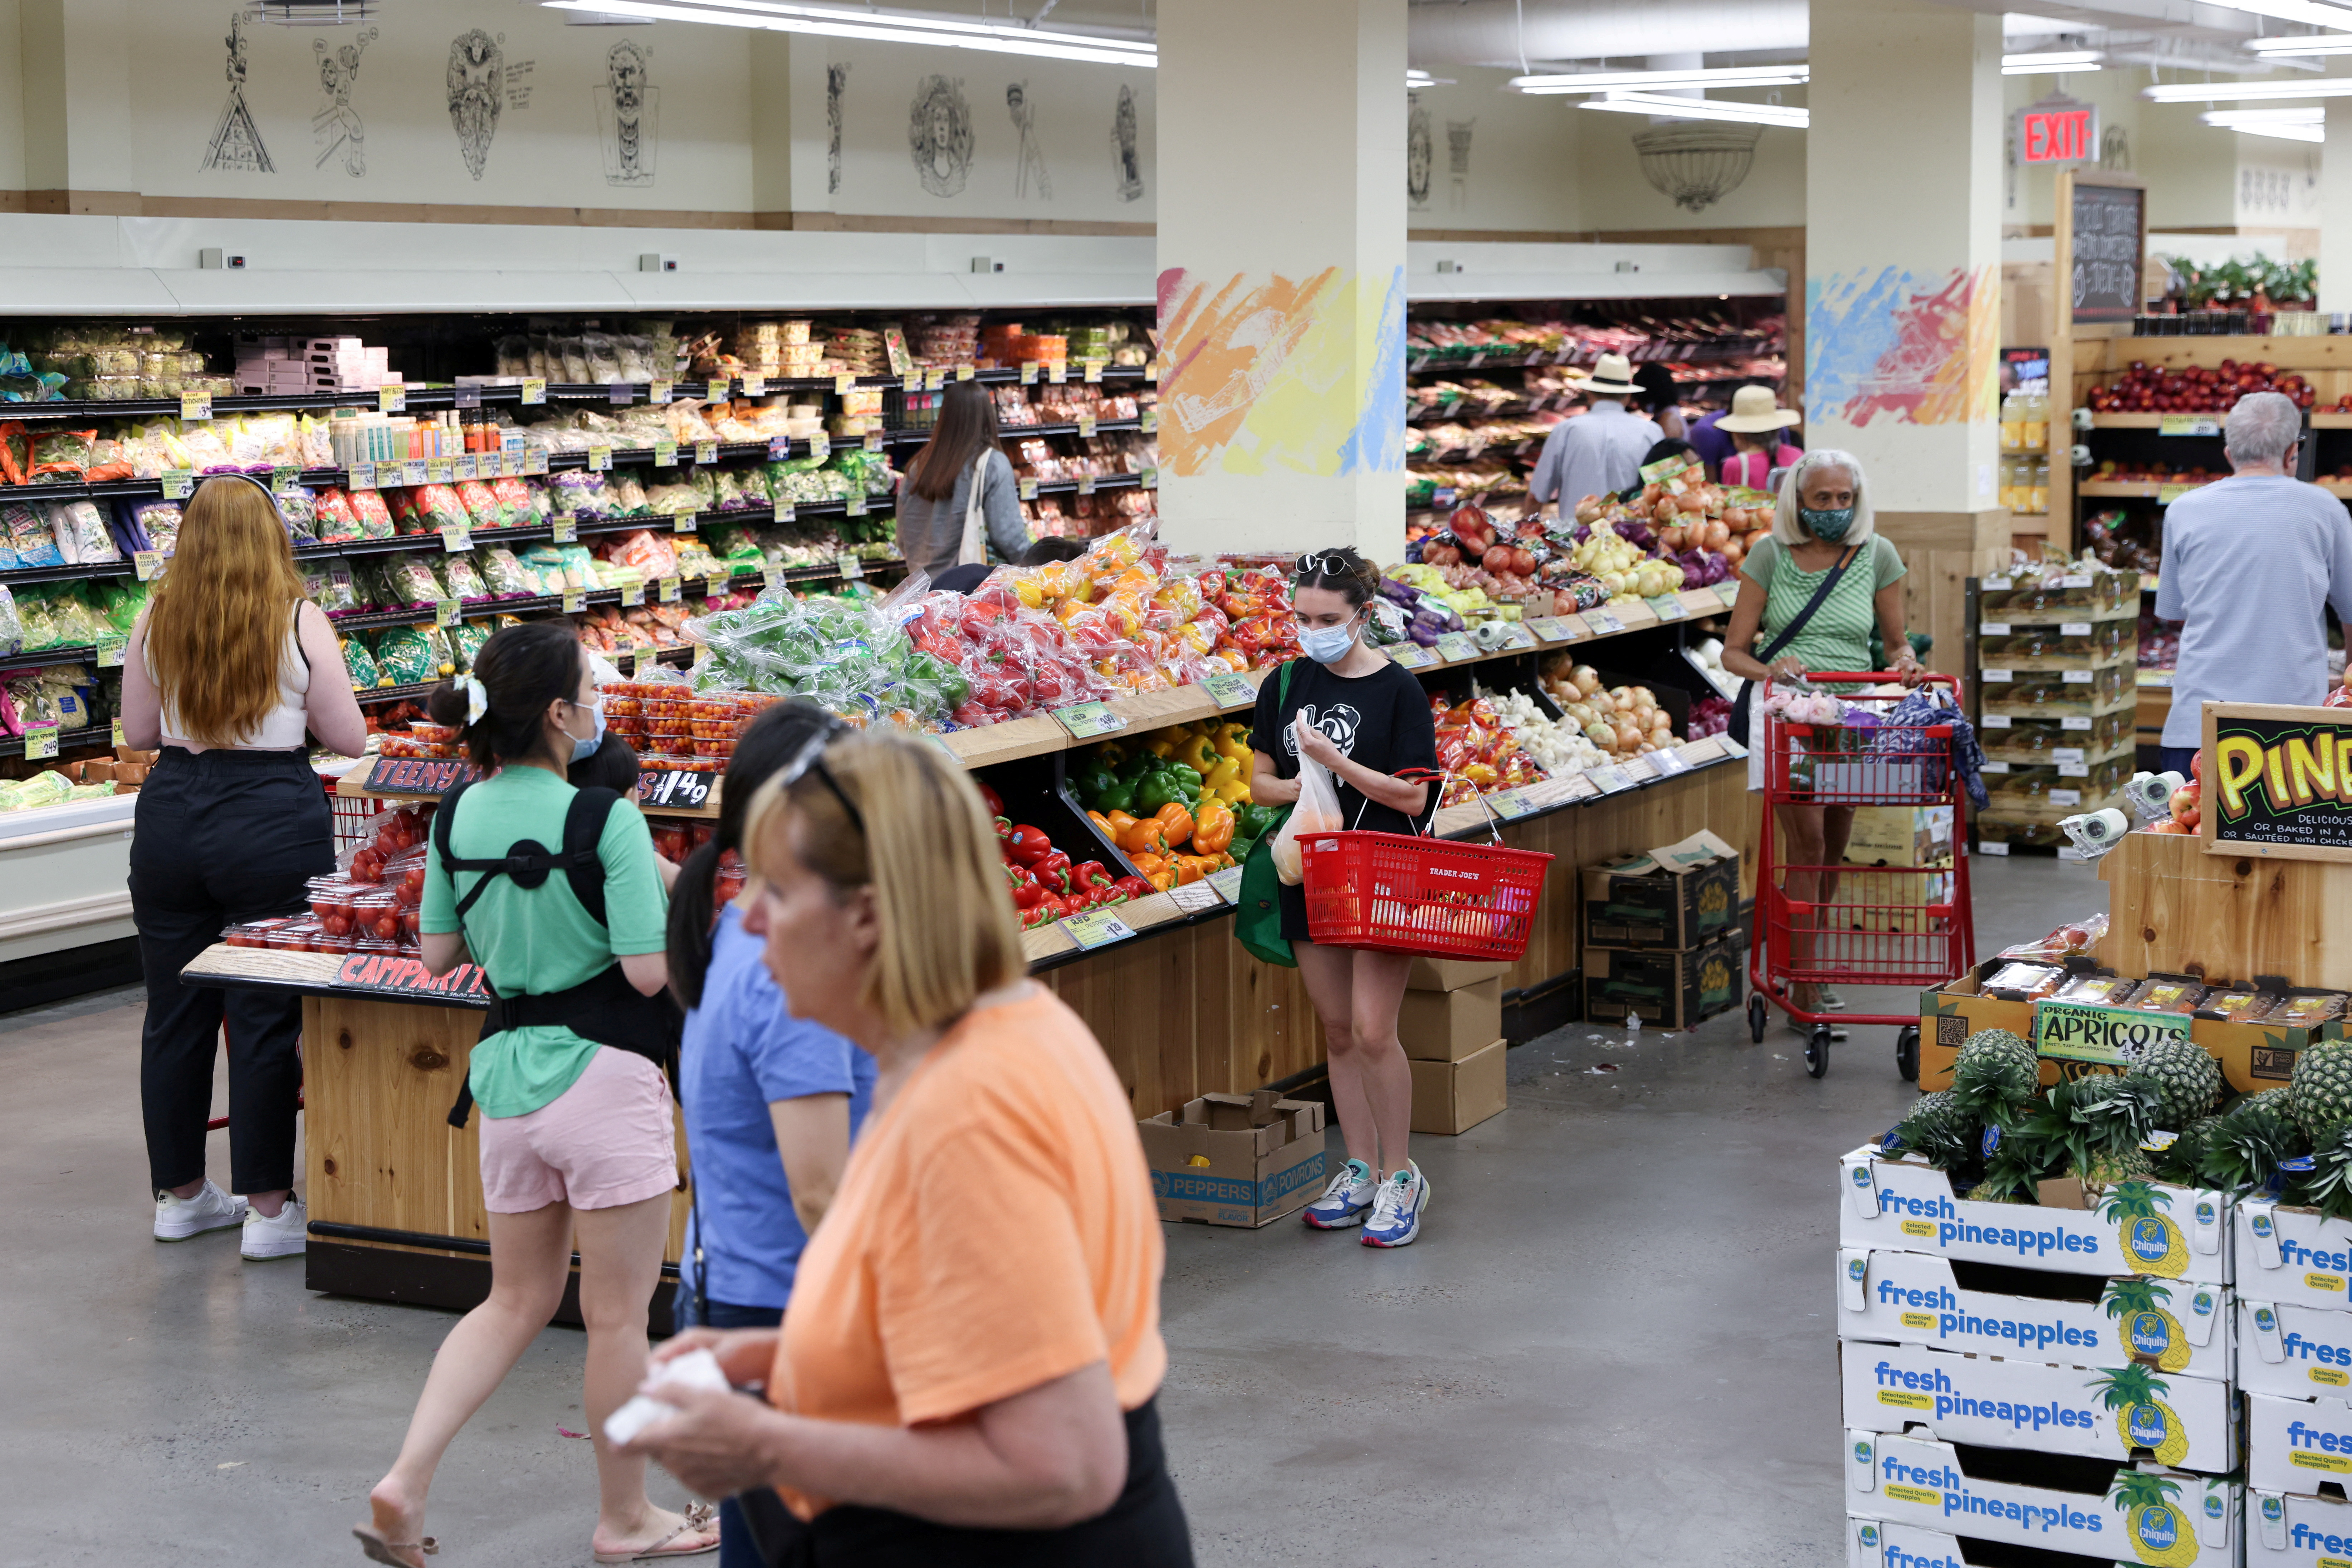 People shop at a supermarket as inflation hits consumer prices in Manhattan, New York, U.S., June 10, 2022. (REUTERS/Andrew Kelly/File)